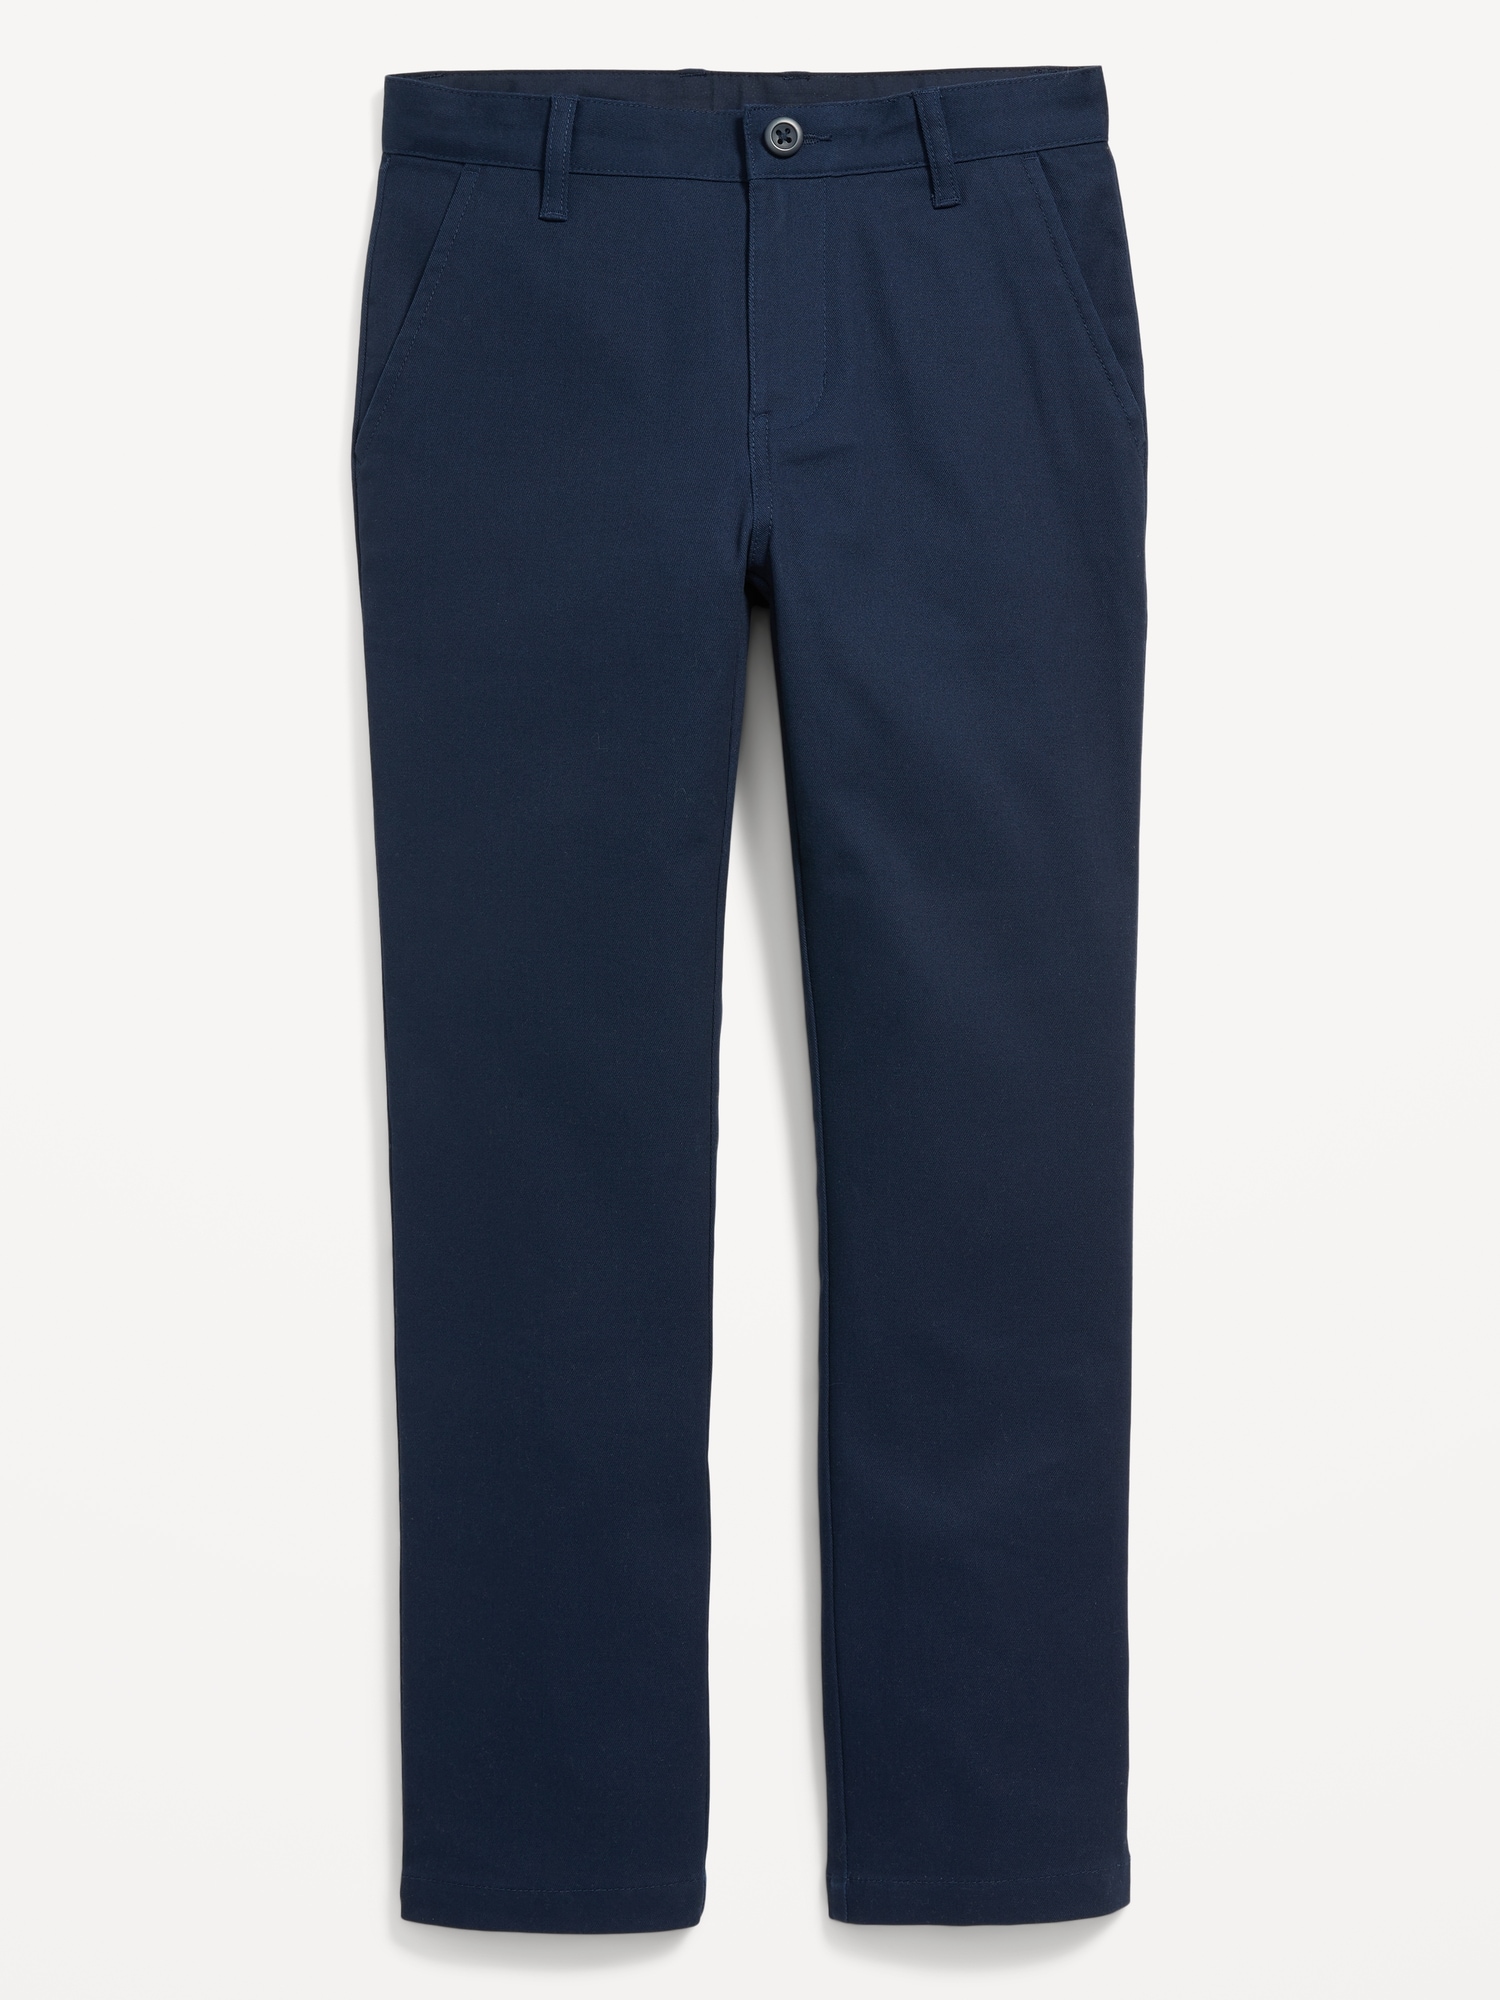 Old Navy Uniform Built-In Flex Skinny Pants for Boys | Southcentre Mall